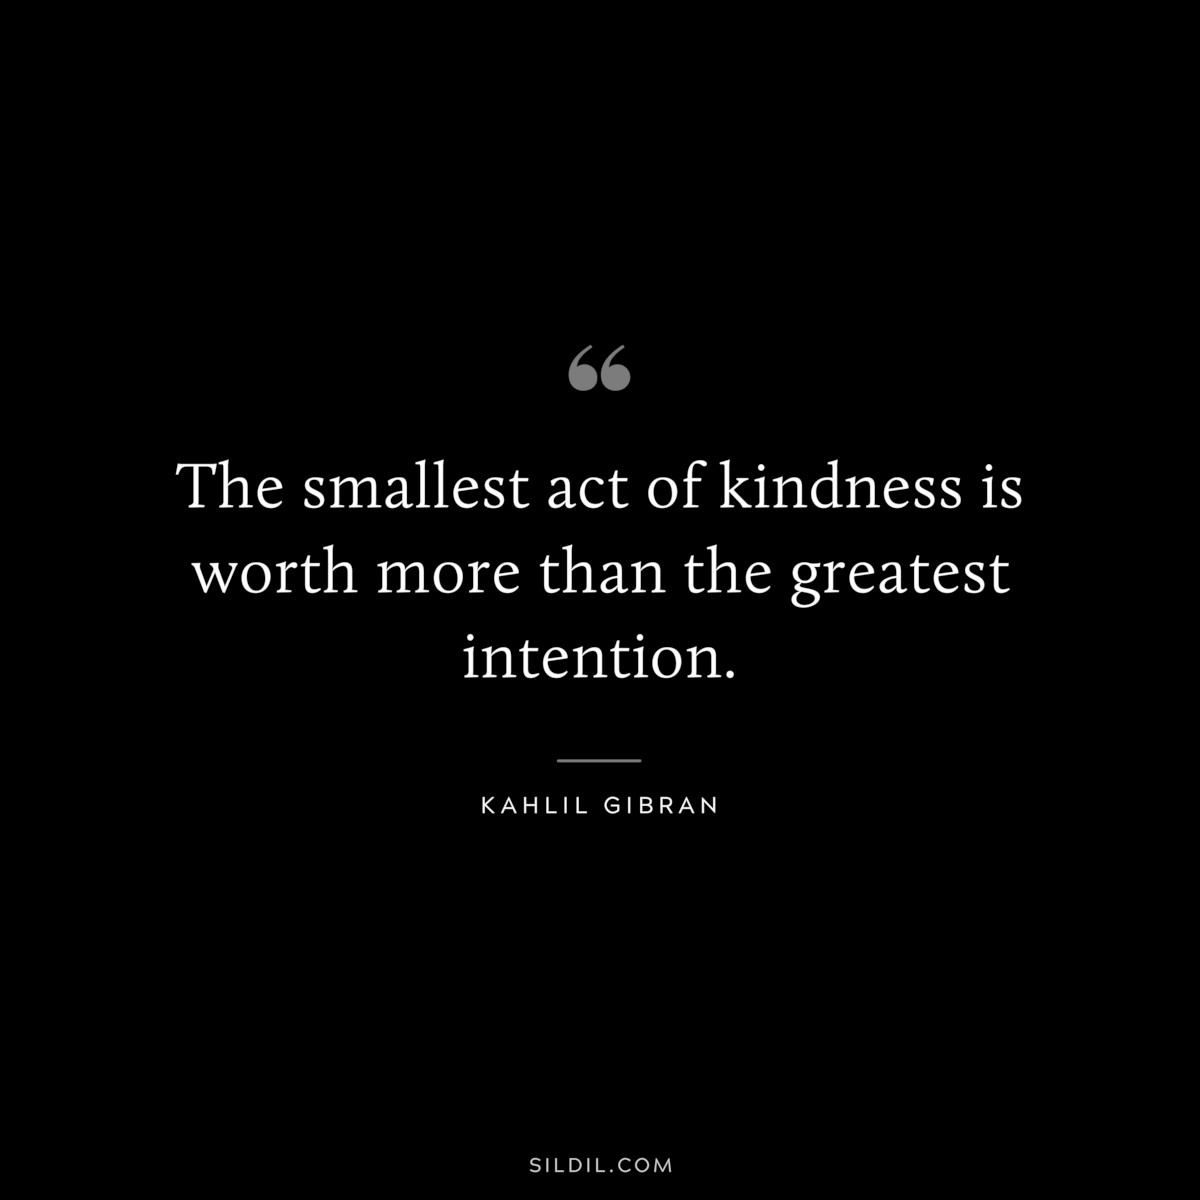 The smallest act of kindness is worth more than the greatest intention. ― Kahlil Gibran